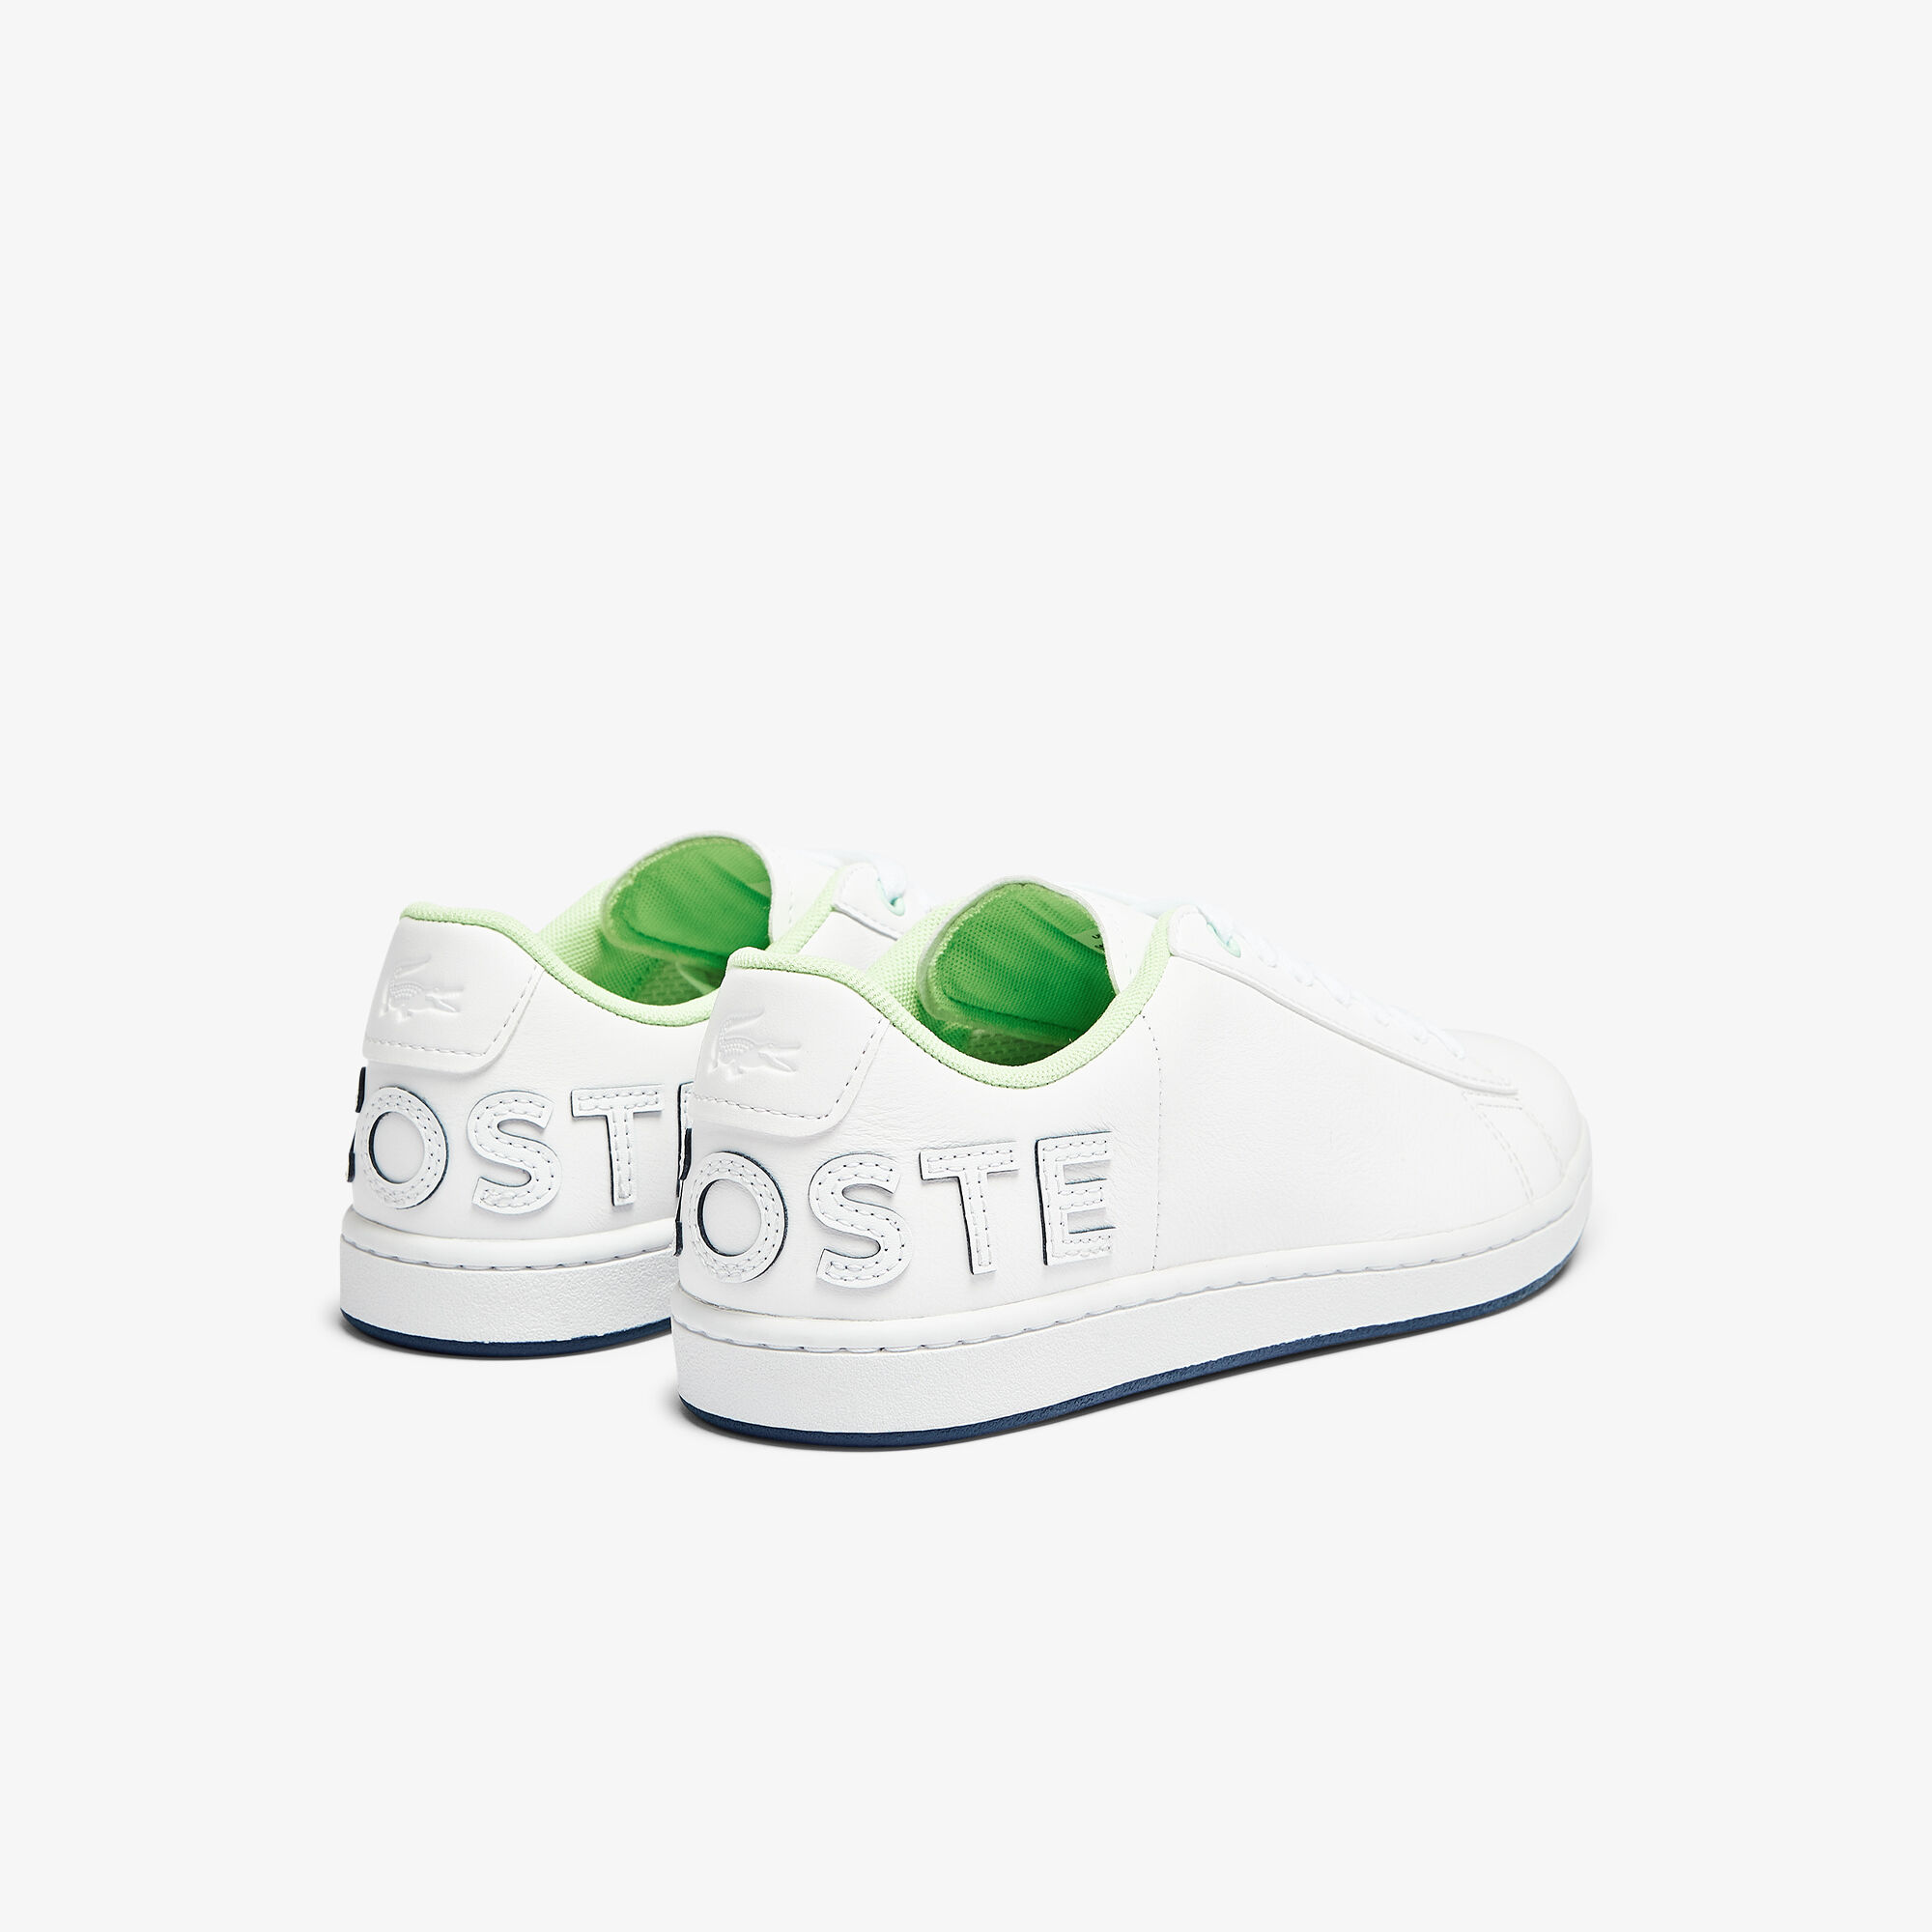 Women's Carnaby Evo Leather Citrus Accent Sneakers